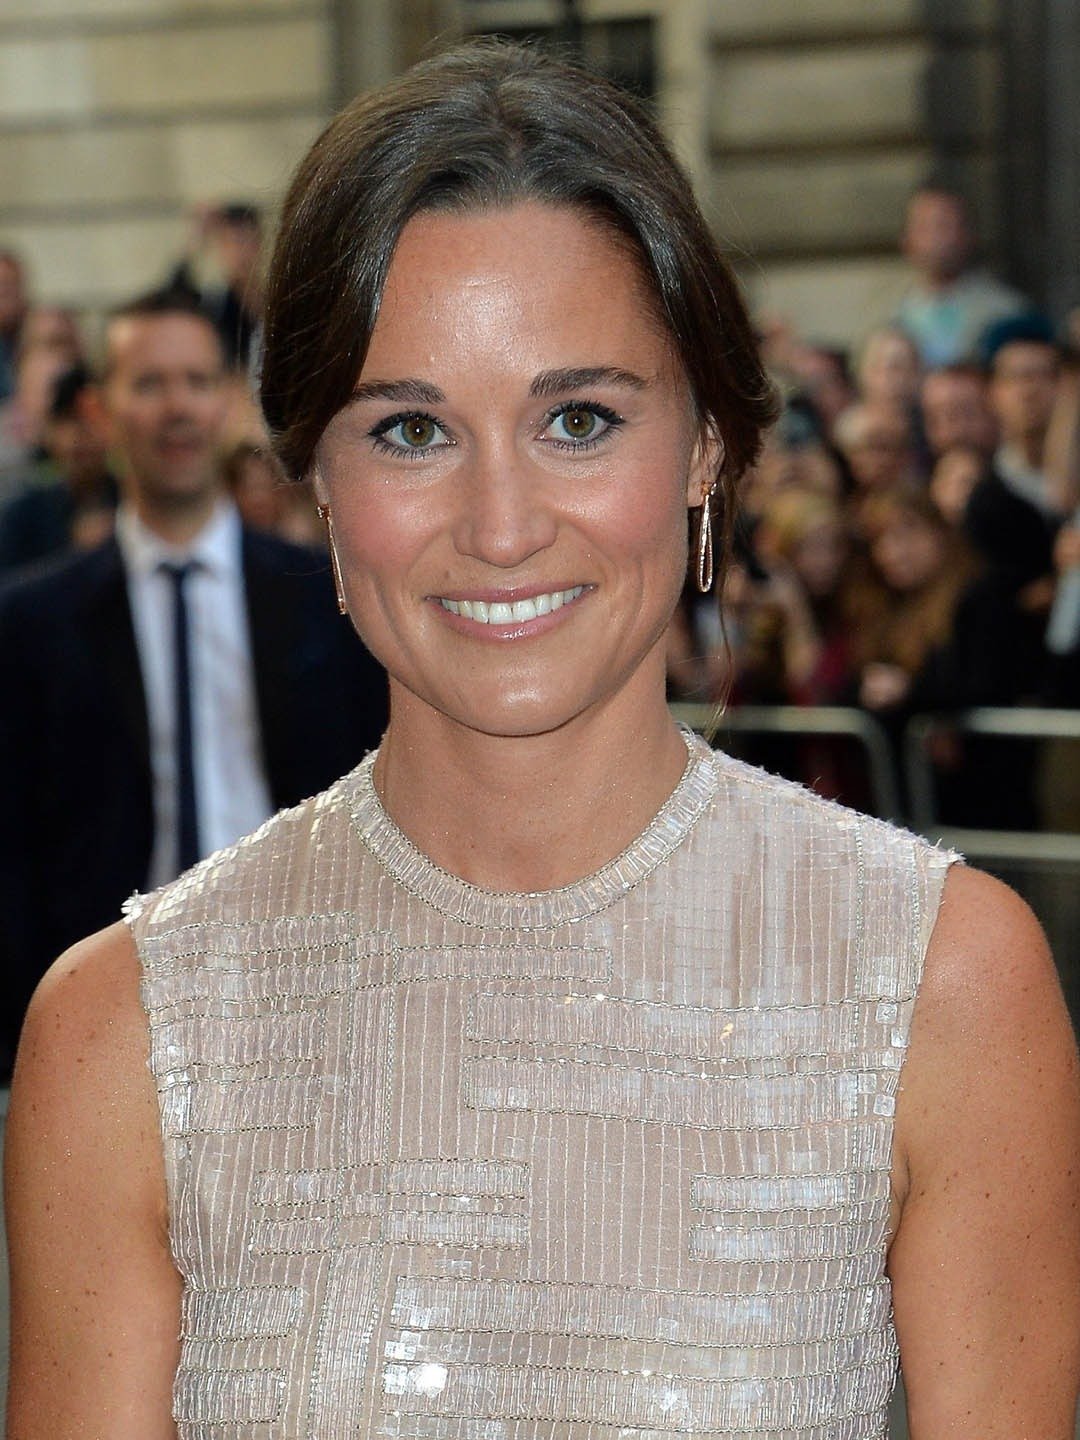 How tall is Pippa Middleton?